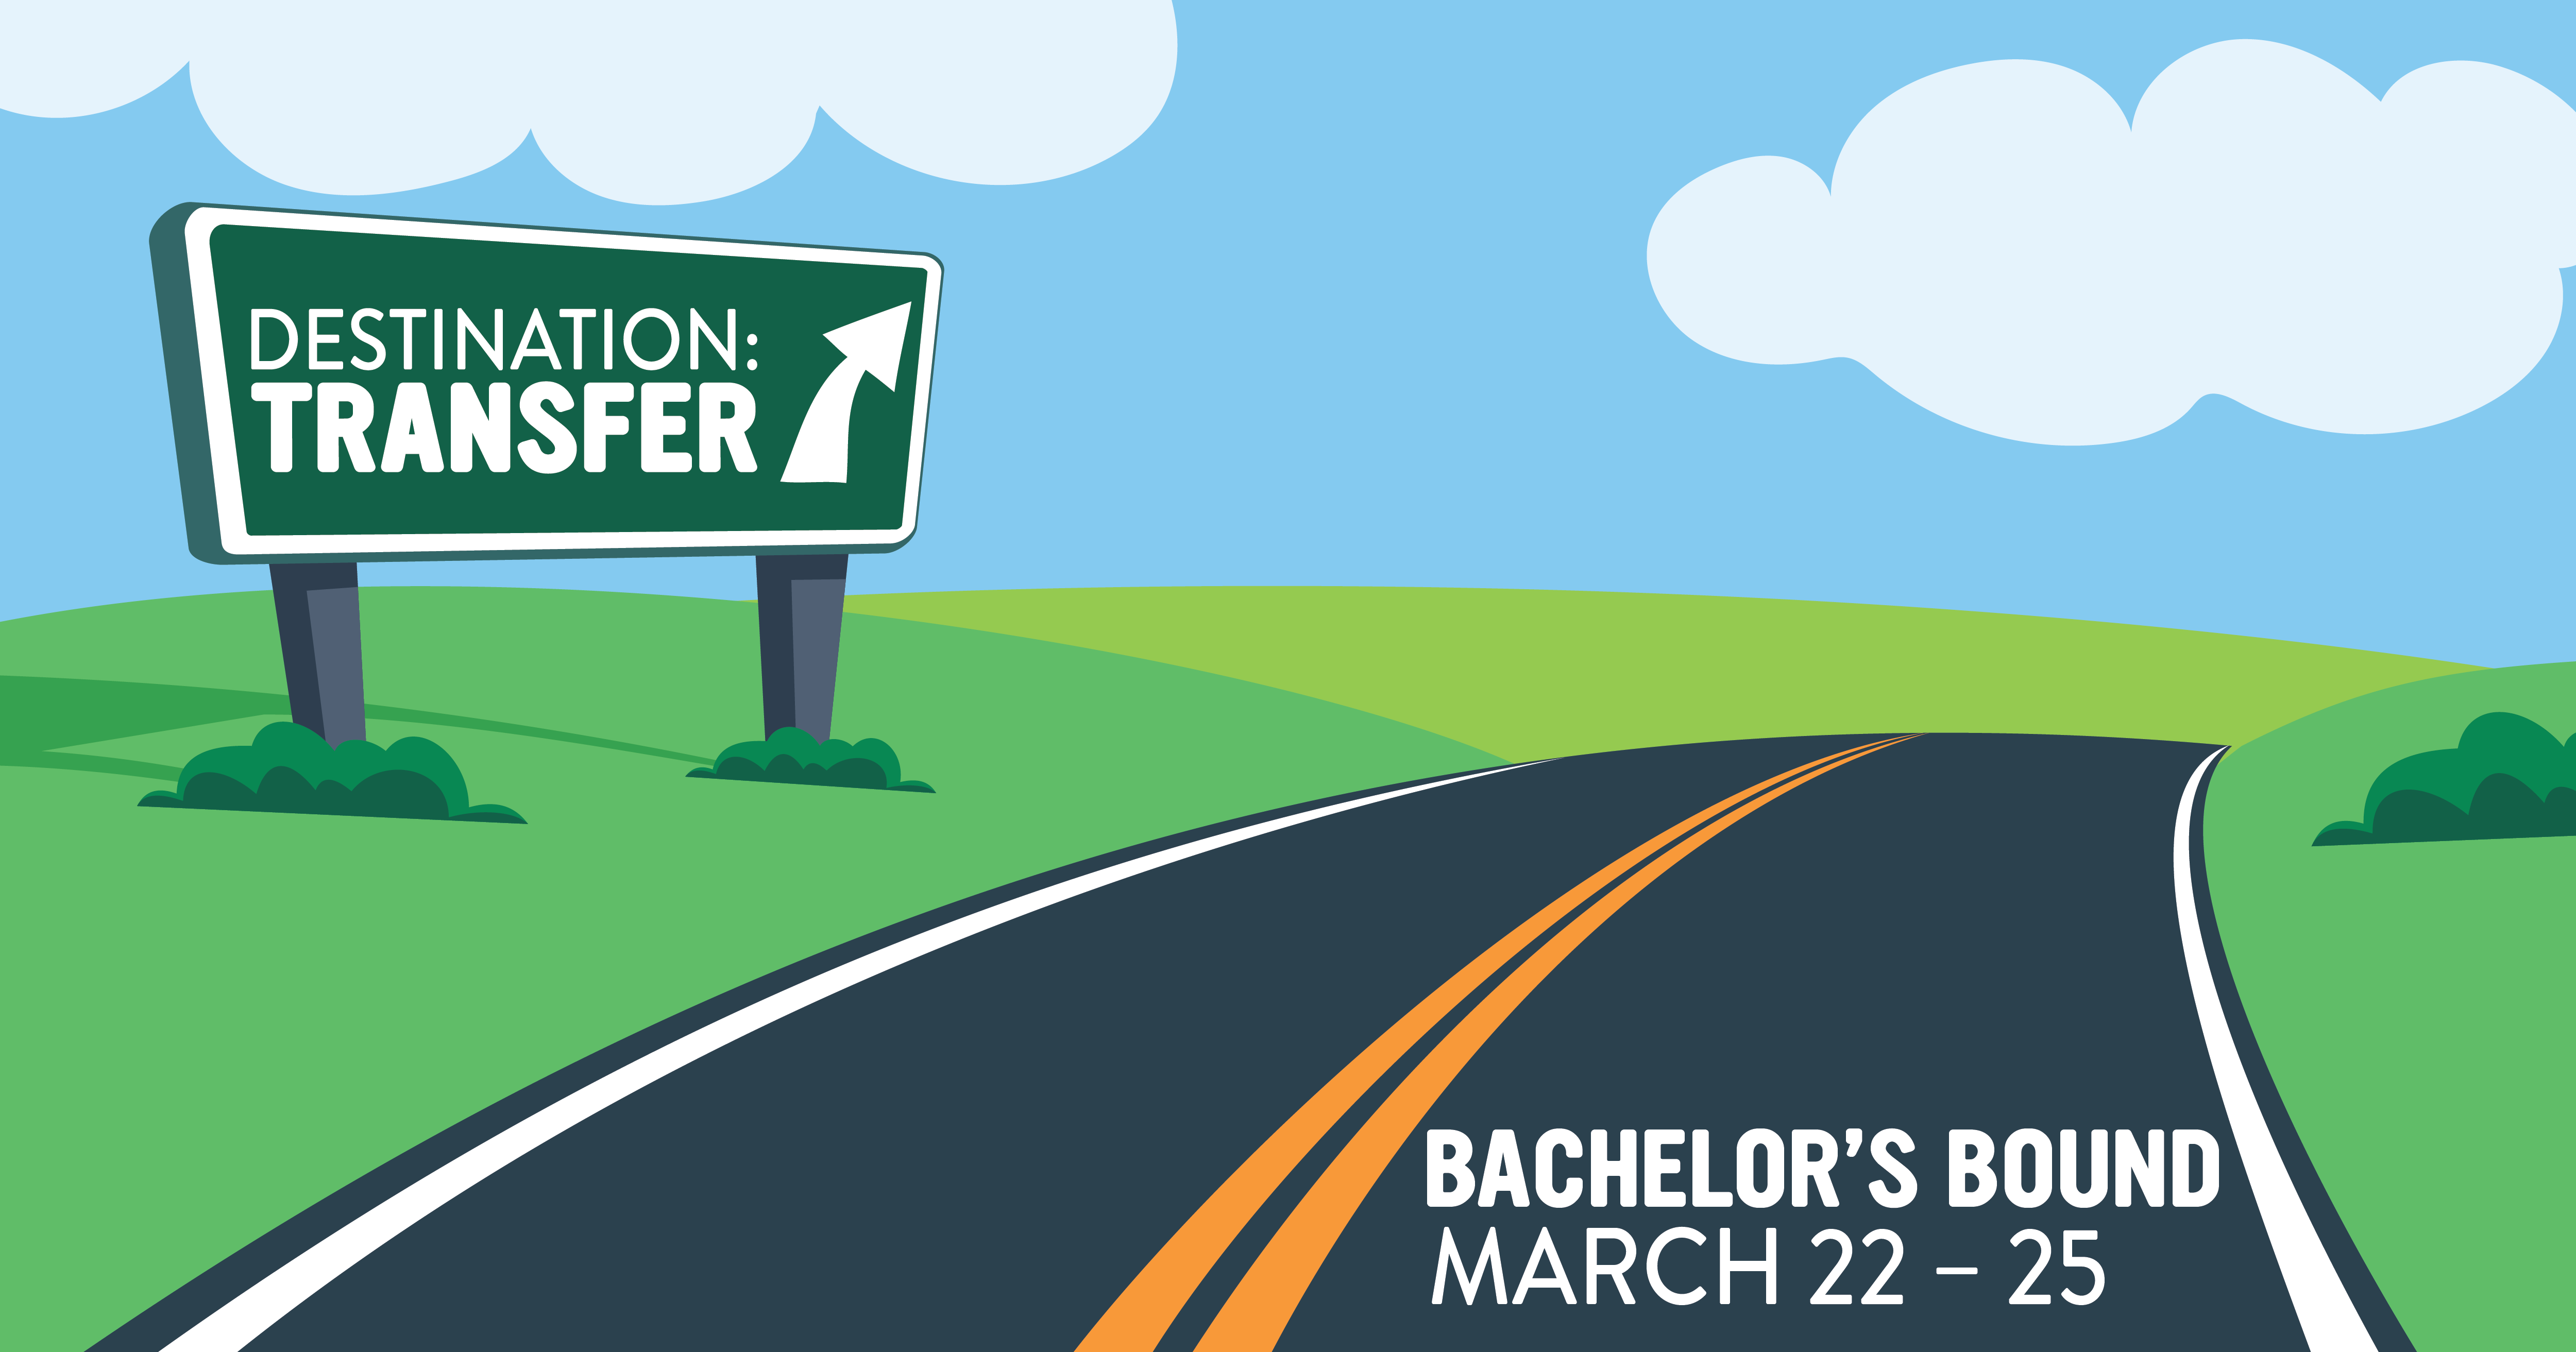 Destination: Transfer on road sign, Bachelor's Bound March 22-25 on road